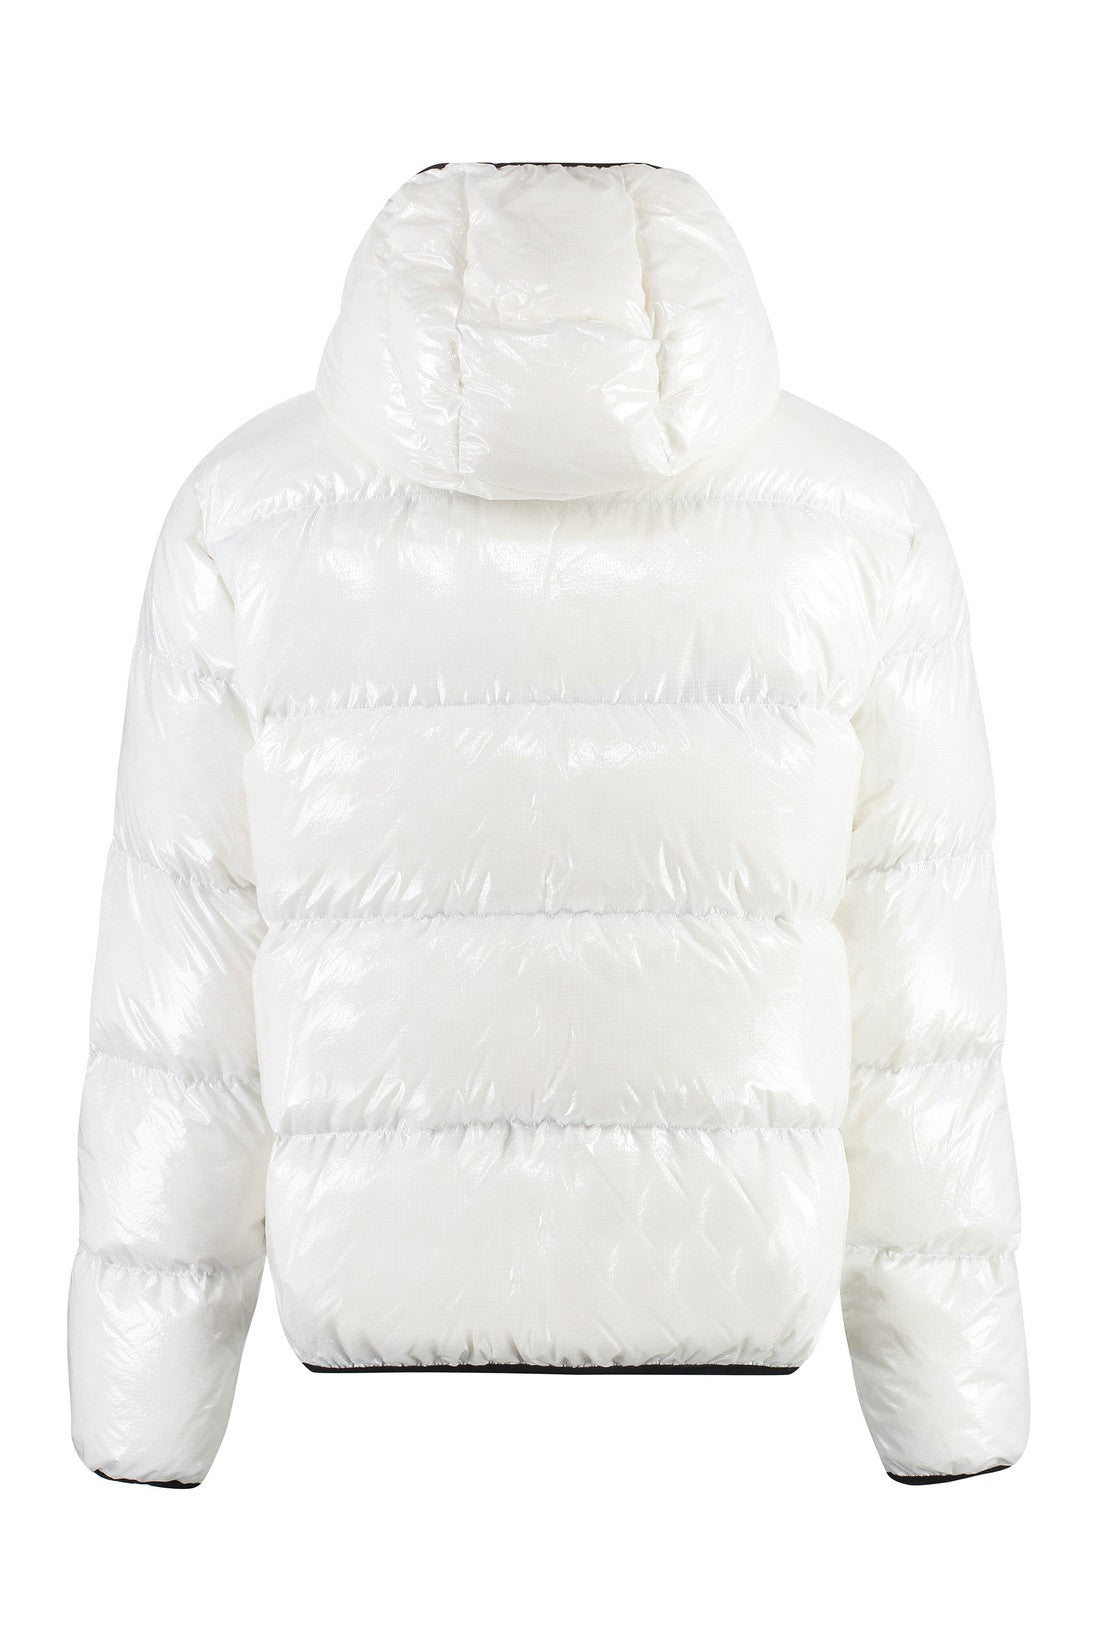 Dsquared2-OUTLET-SALE-Kaban hooded shiny down jacket-ARCHIVIST